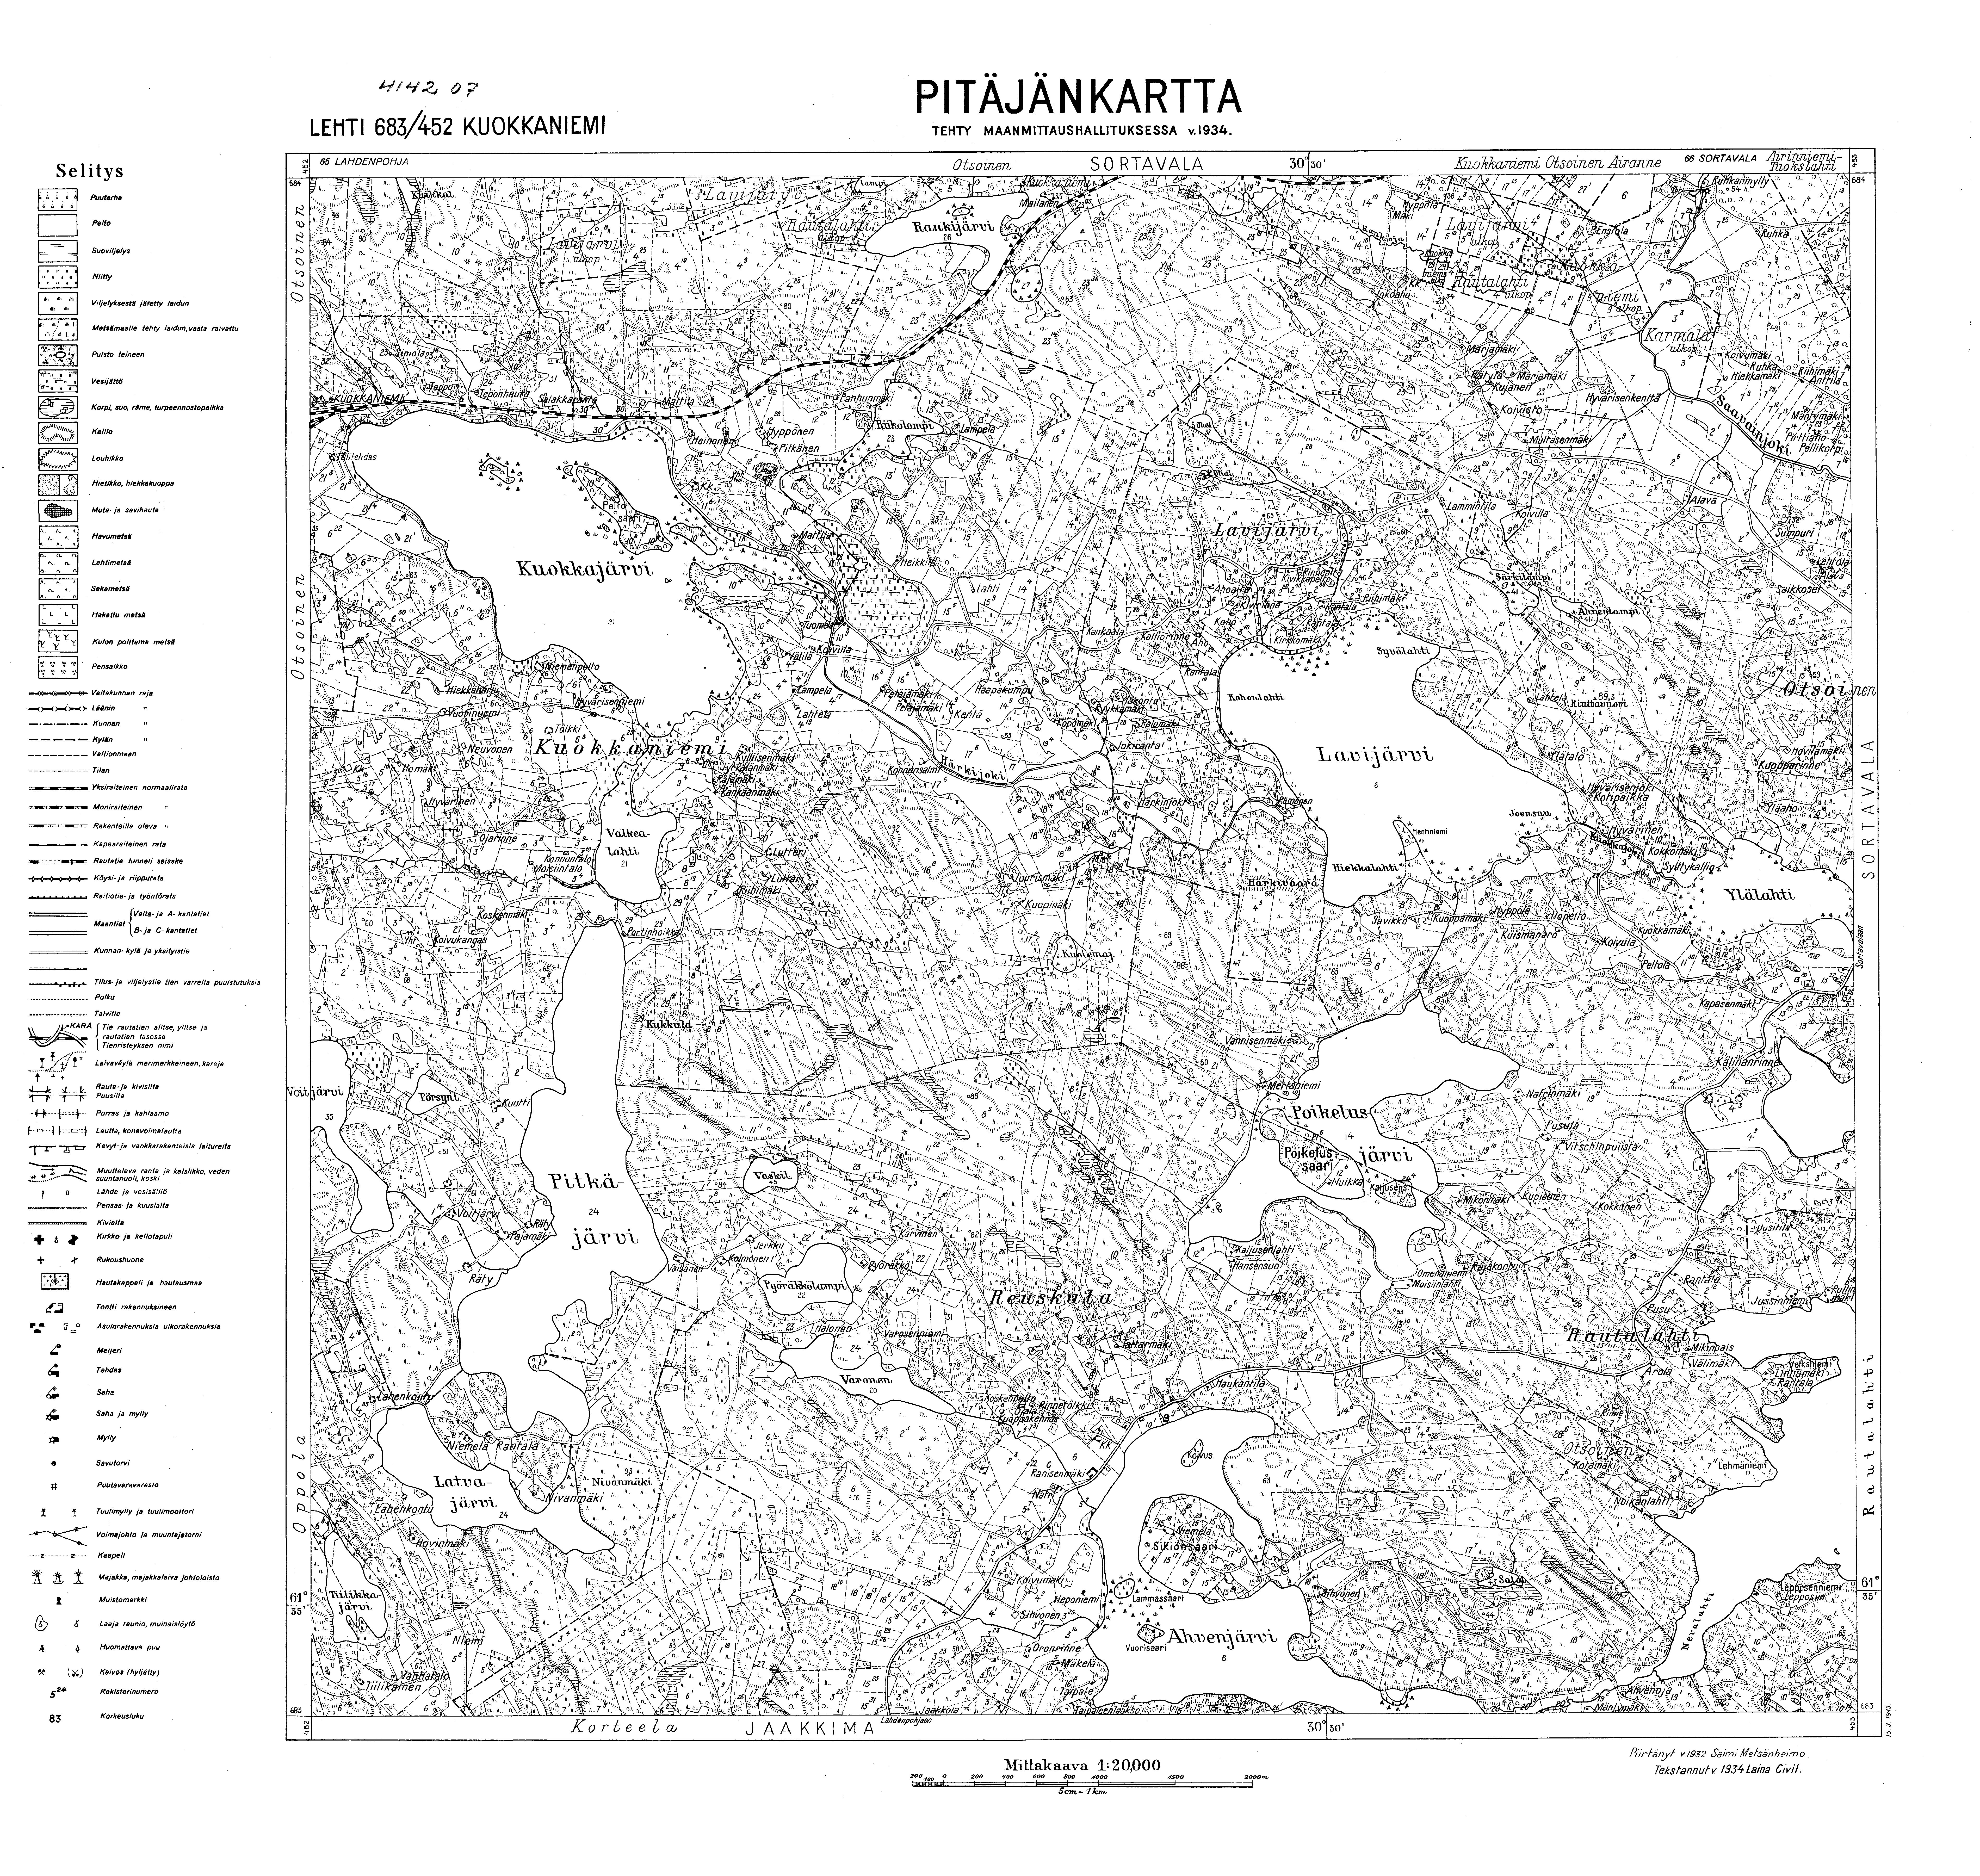 Kuokkaniemi. Pitäjänkartta 414207. Parish map from 1932. Use the zooming tool to explore in higher level of detail. Obtain as a quality print or high resolution image